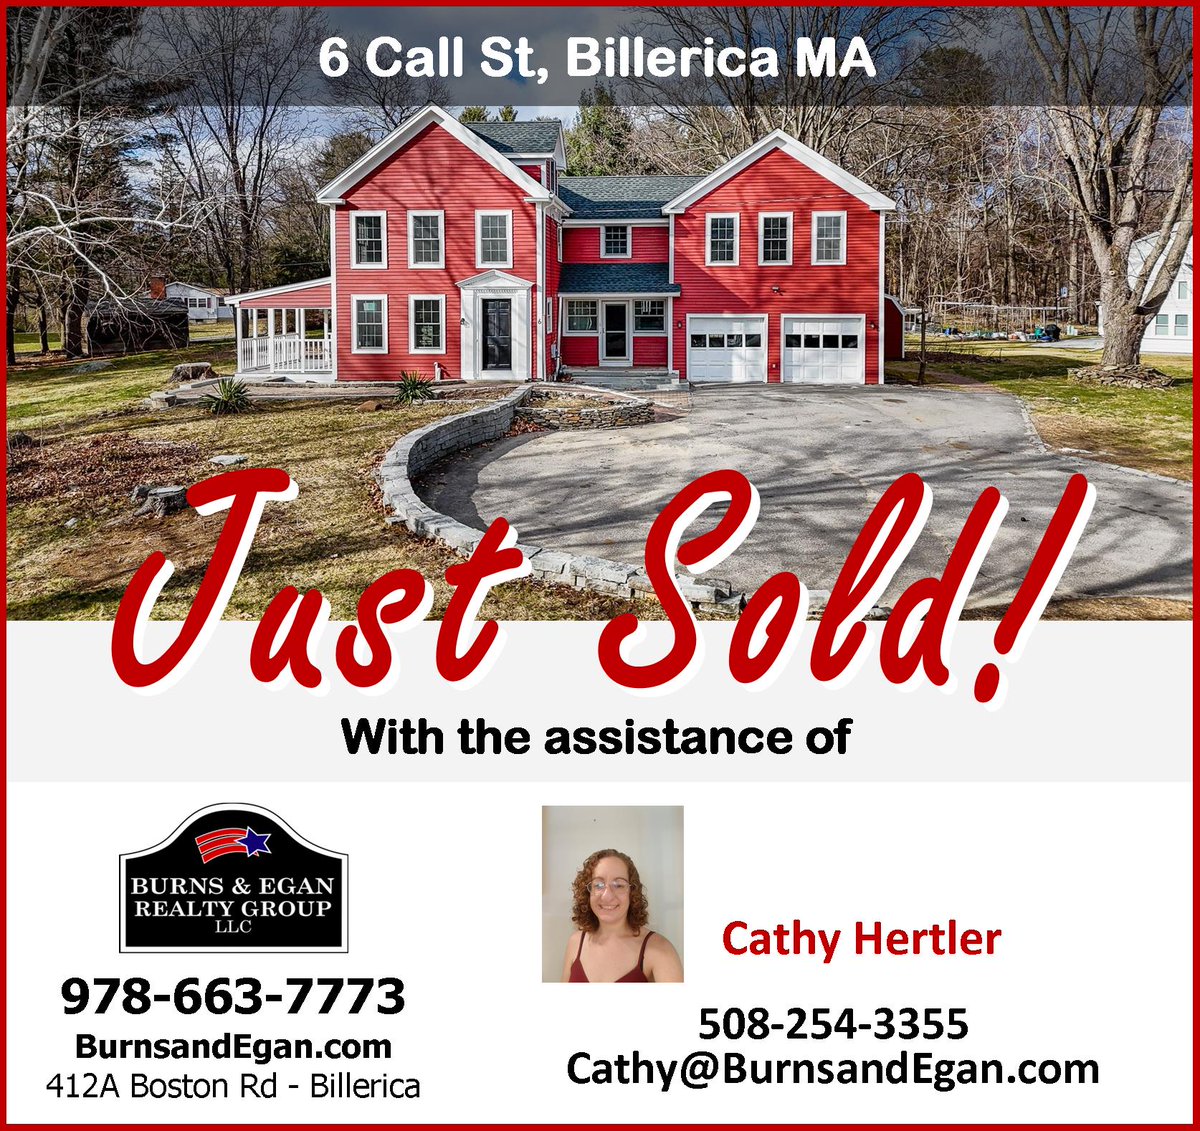 ANOTHER HAPPY HOMEOWNER JUST CLOSED ON THEIR NEW HOME!   Are you looking to buy a home in today's market? 
#Billericarealestate  #burnsandegan #Justsold #homeownership #homeownershipgoals #realestate #Billericahomes  #BillericaMA #realestatemarket  #dreamhome #newhome